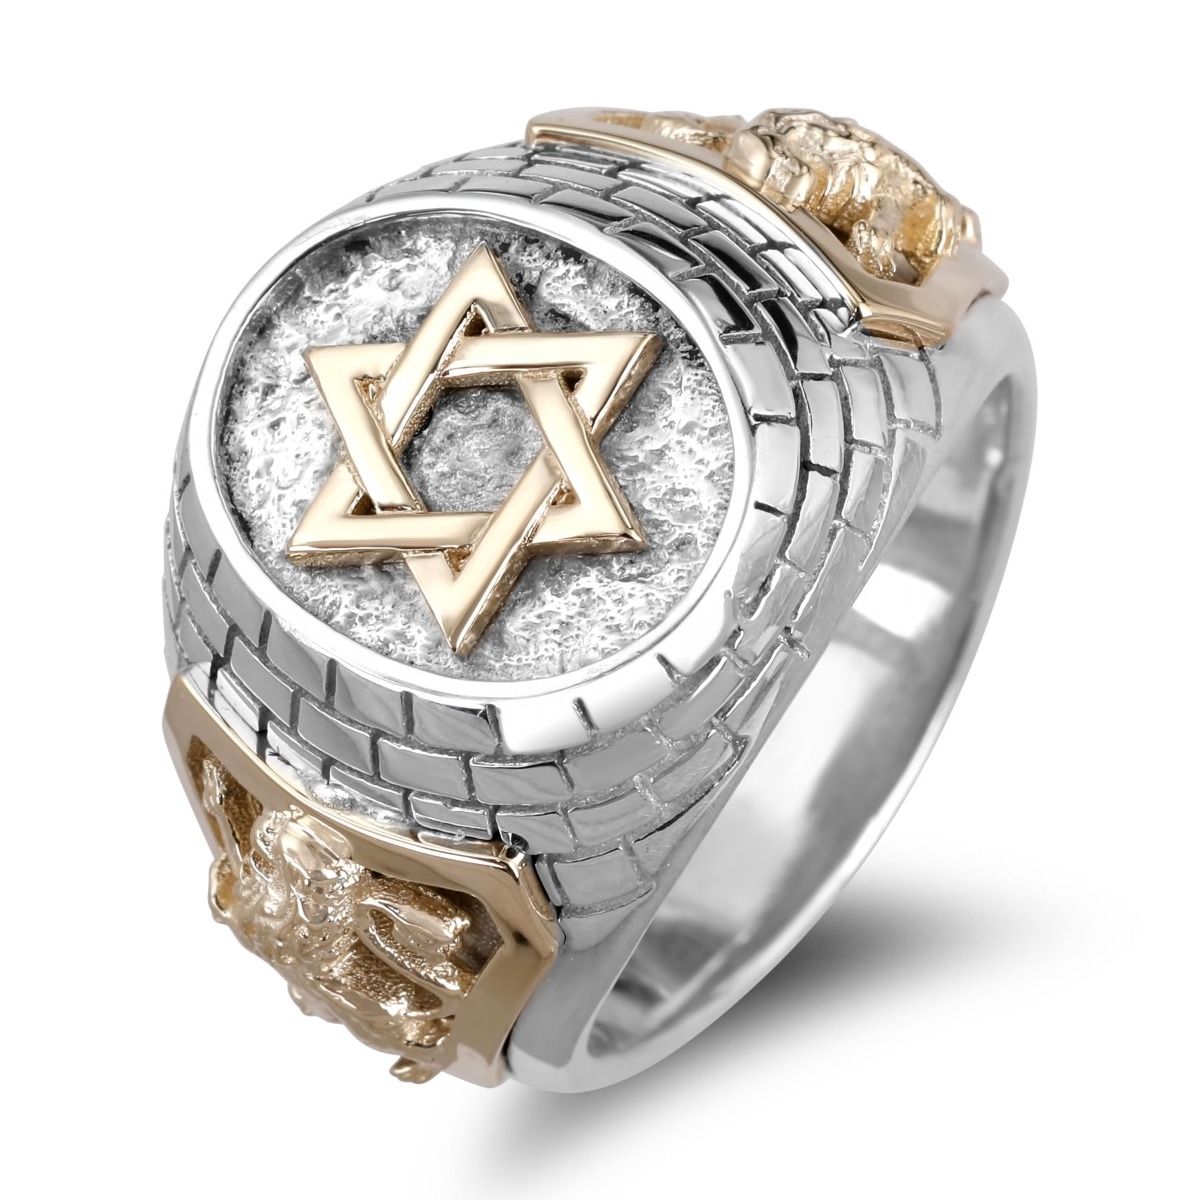 Rafael Jewelry Sterling Silver and 14K Gold Star of David Jerusalem Lions Ring  - 1